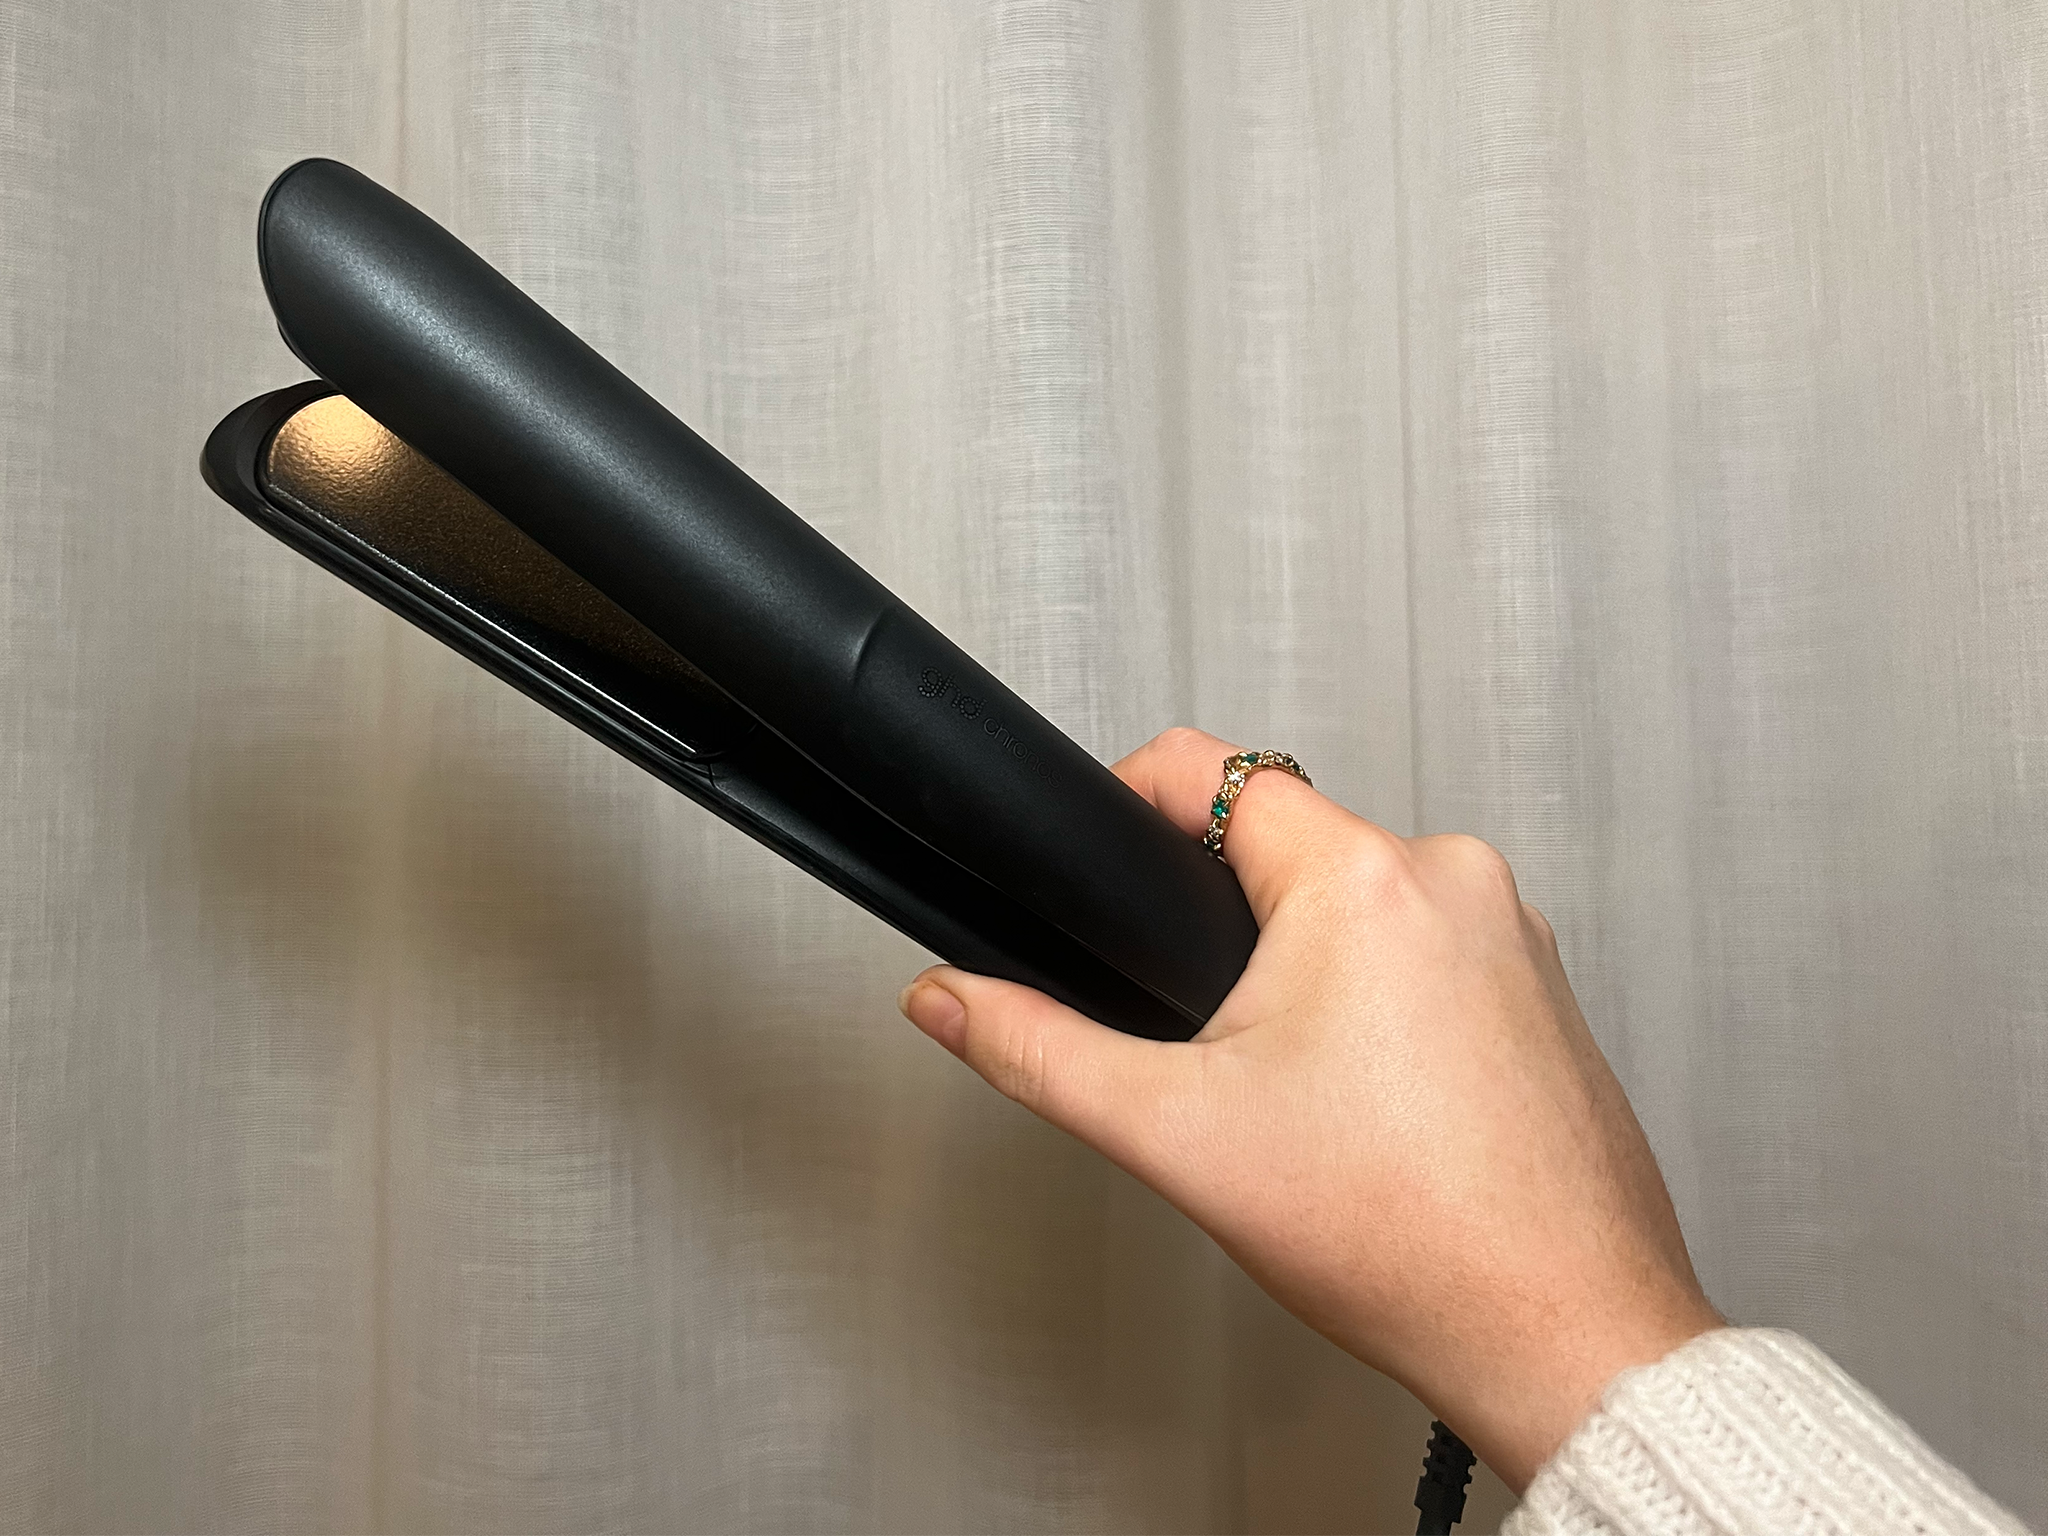 Here at IndyBest, we’re always one of the first to try new products, and the Ghd chronos was no exception